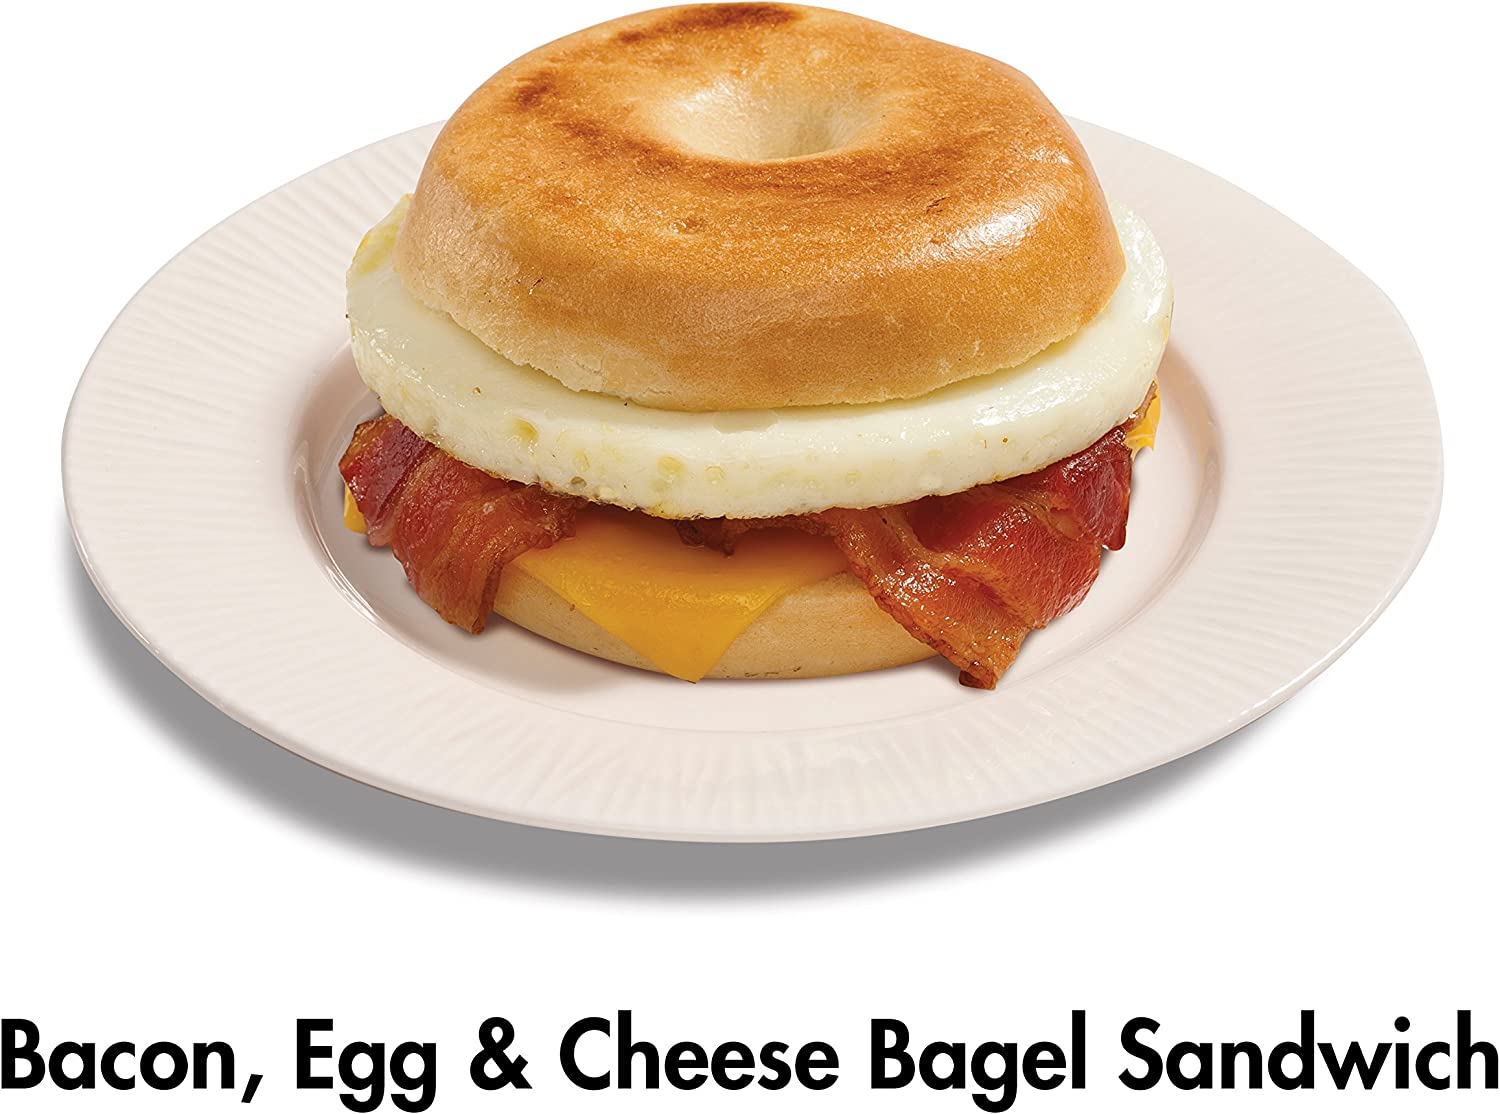  Hamilton Beach Breakfast Sandwich Maker with Egg Cooker Ring,  Customize Ingredients, Perfect for English Muffins, Croissants, Mini  Waffles, Perfect White Elephant Gifts, Black (25477): Bacon: Home & Kitchen